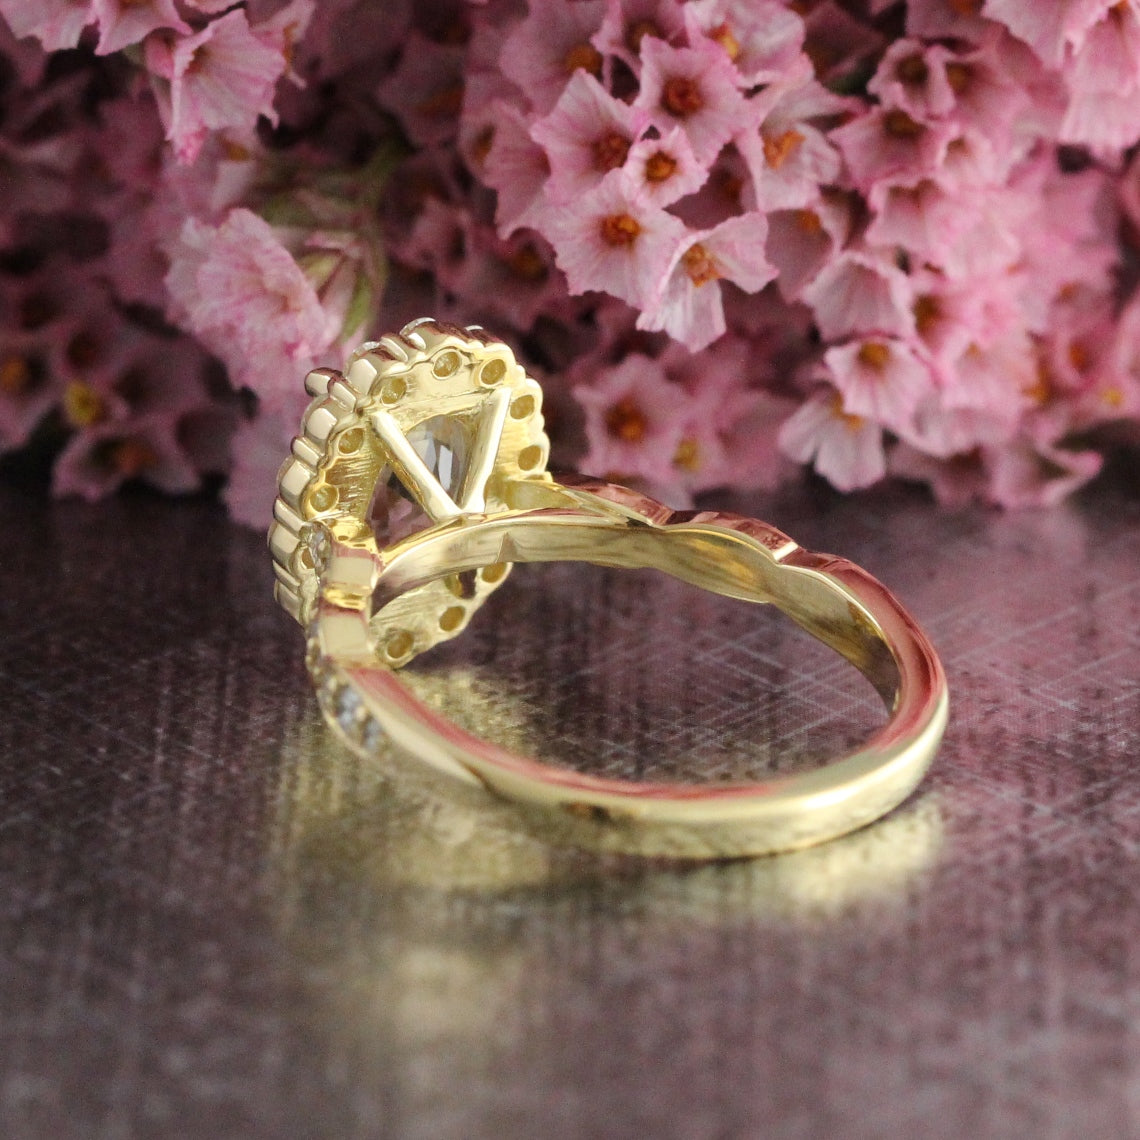 2.82 Ct Natural Yellow Sapphire Ring in 18k Yellow Gold Oval Halo Diamond, Size 6.25